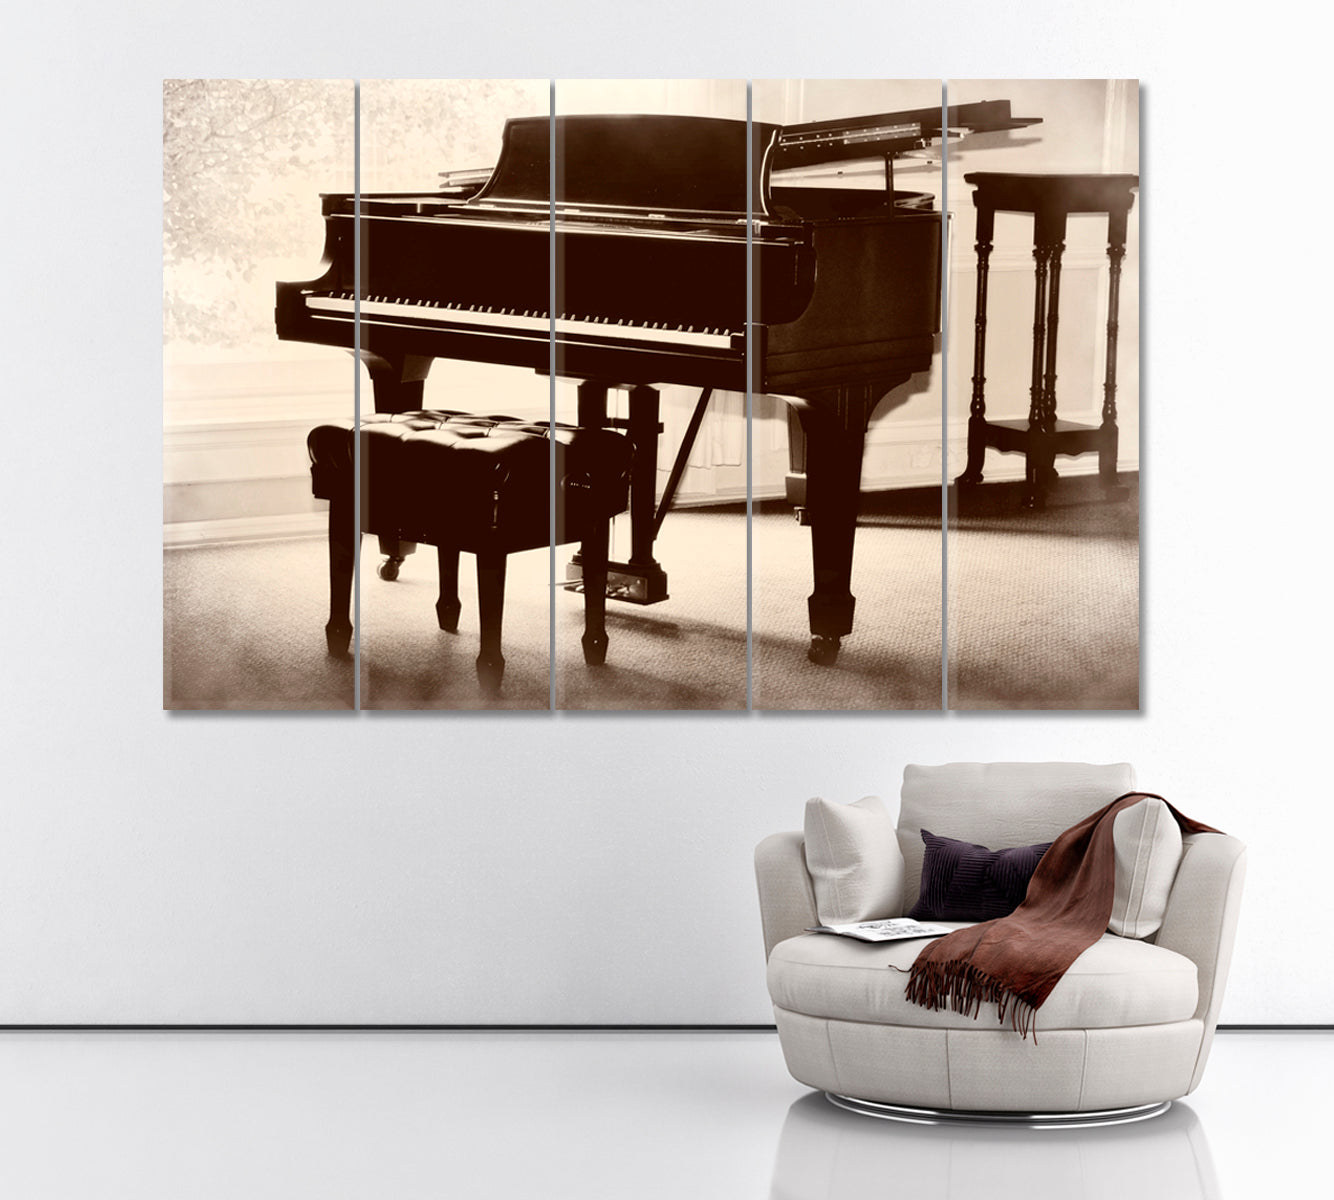 Old Piano Canvas Print ArtLexy 5 Panels 36"x24" inches 